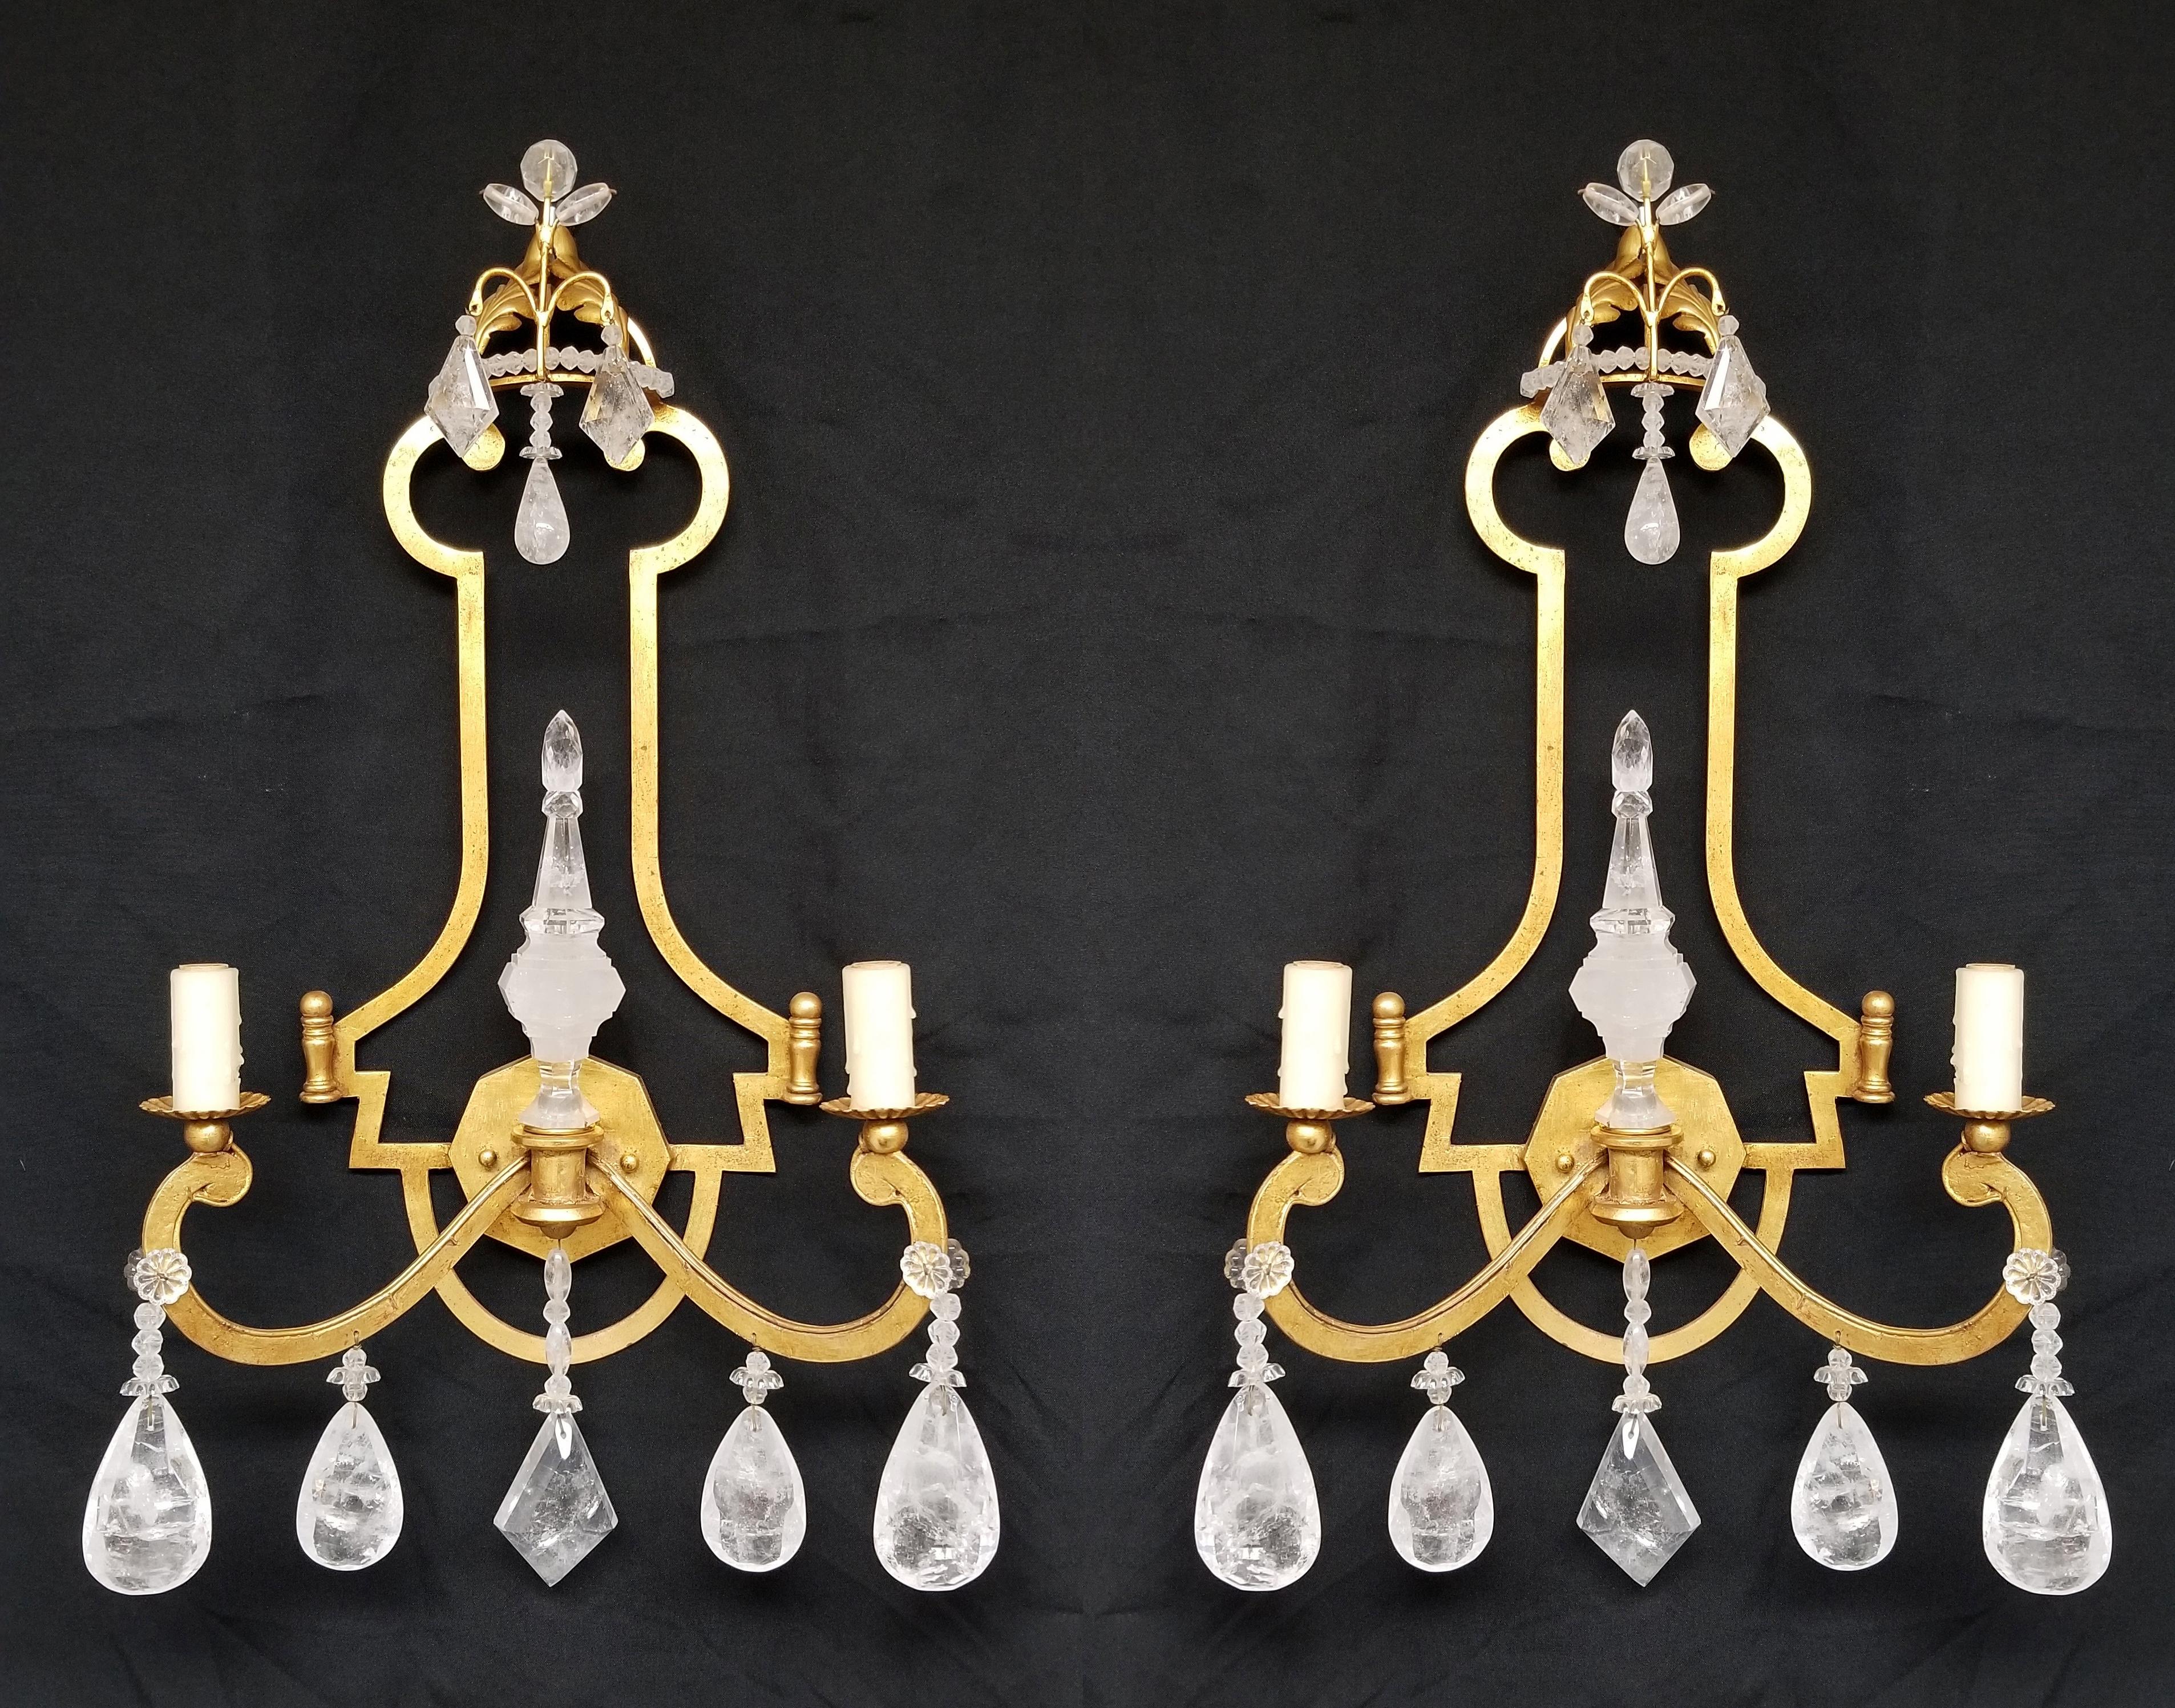 Elegant pair of 22k gold plated hand forged wrought iron two light sconces, with carved rock crystal spike in the center.
combined with 4 hand made bees was candle sleeves. 
Electrified for the American market. 
They come in two sizes:
H. 26